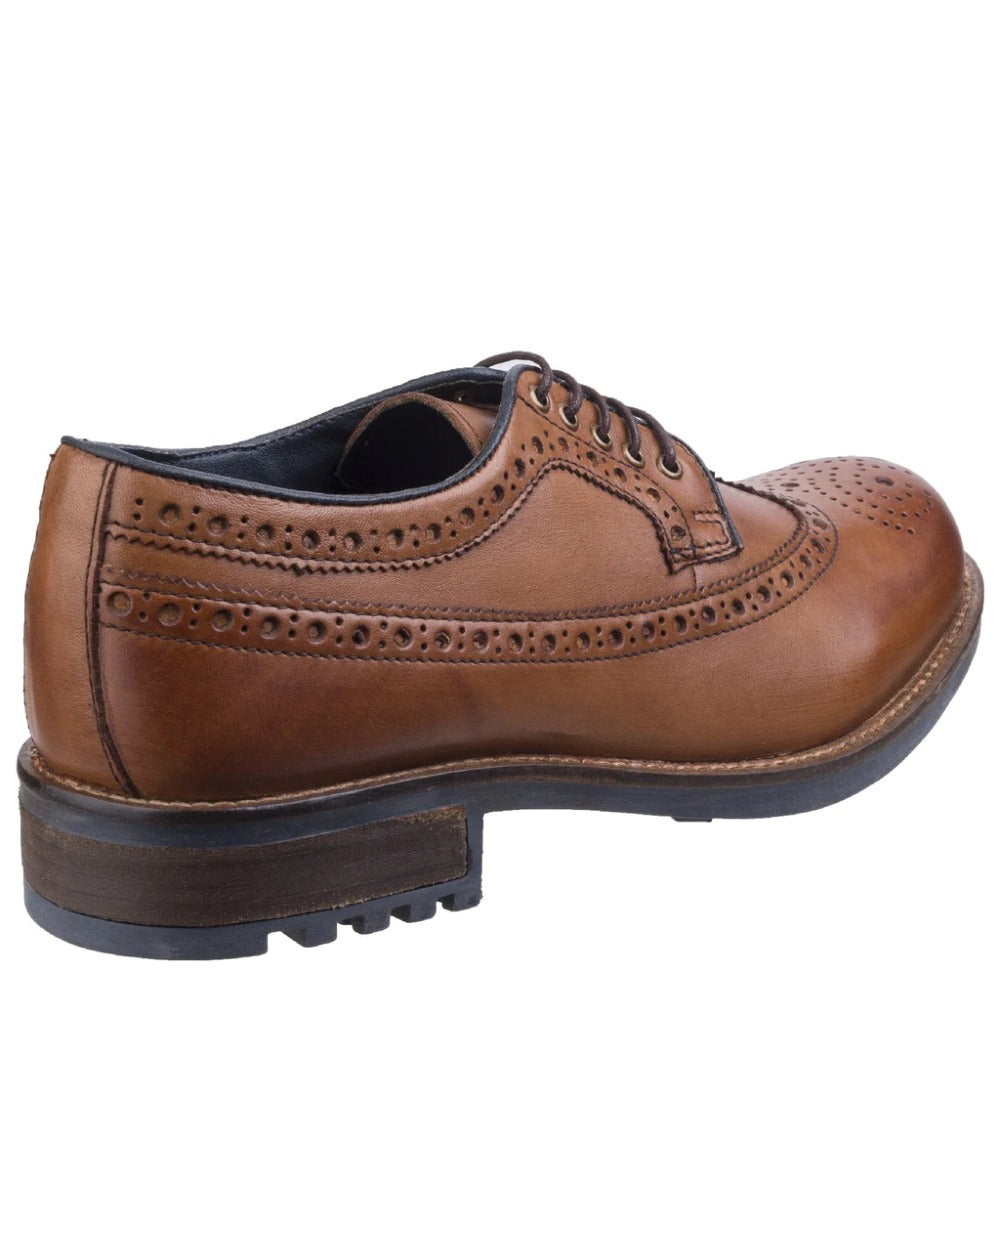 Tan coloured Cotswold Poplar Brogue Dress Shoes on white background 